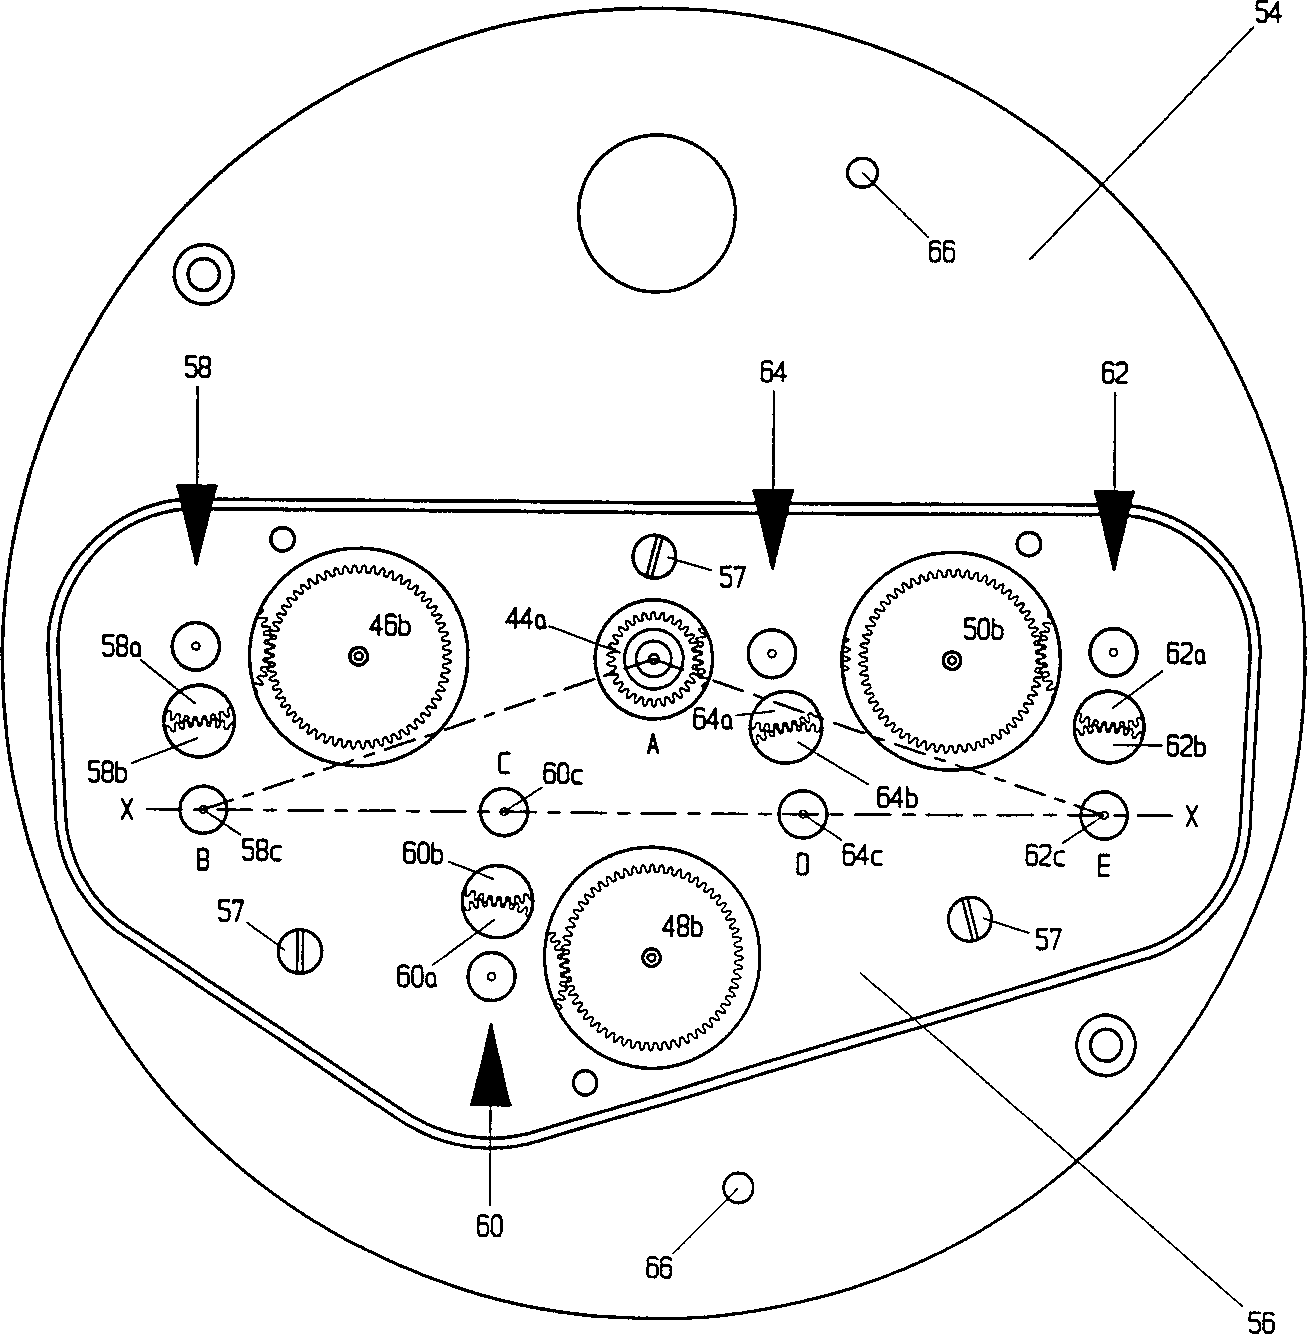 Watch movement with hand display